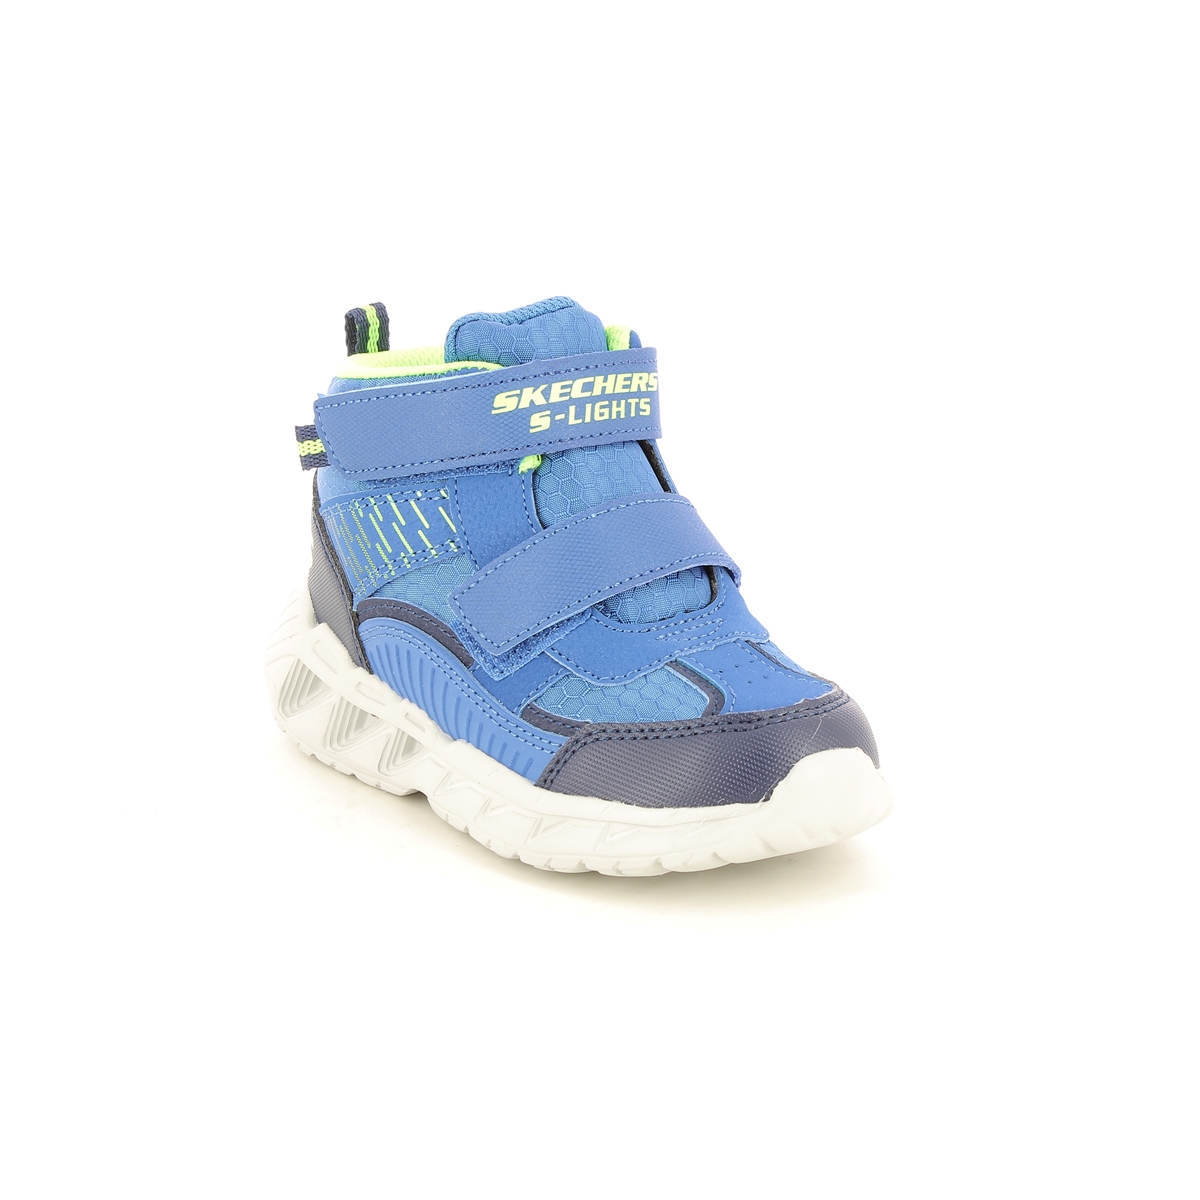 Skechers Magna Lights Boots BLNV Blue Navy Kids boys boots 401504N in a Plain Man-made in Size 24